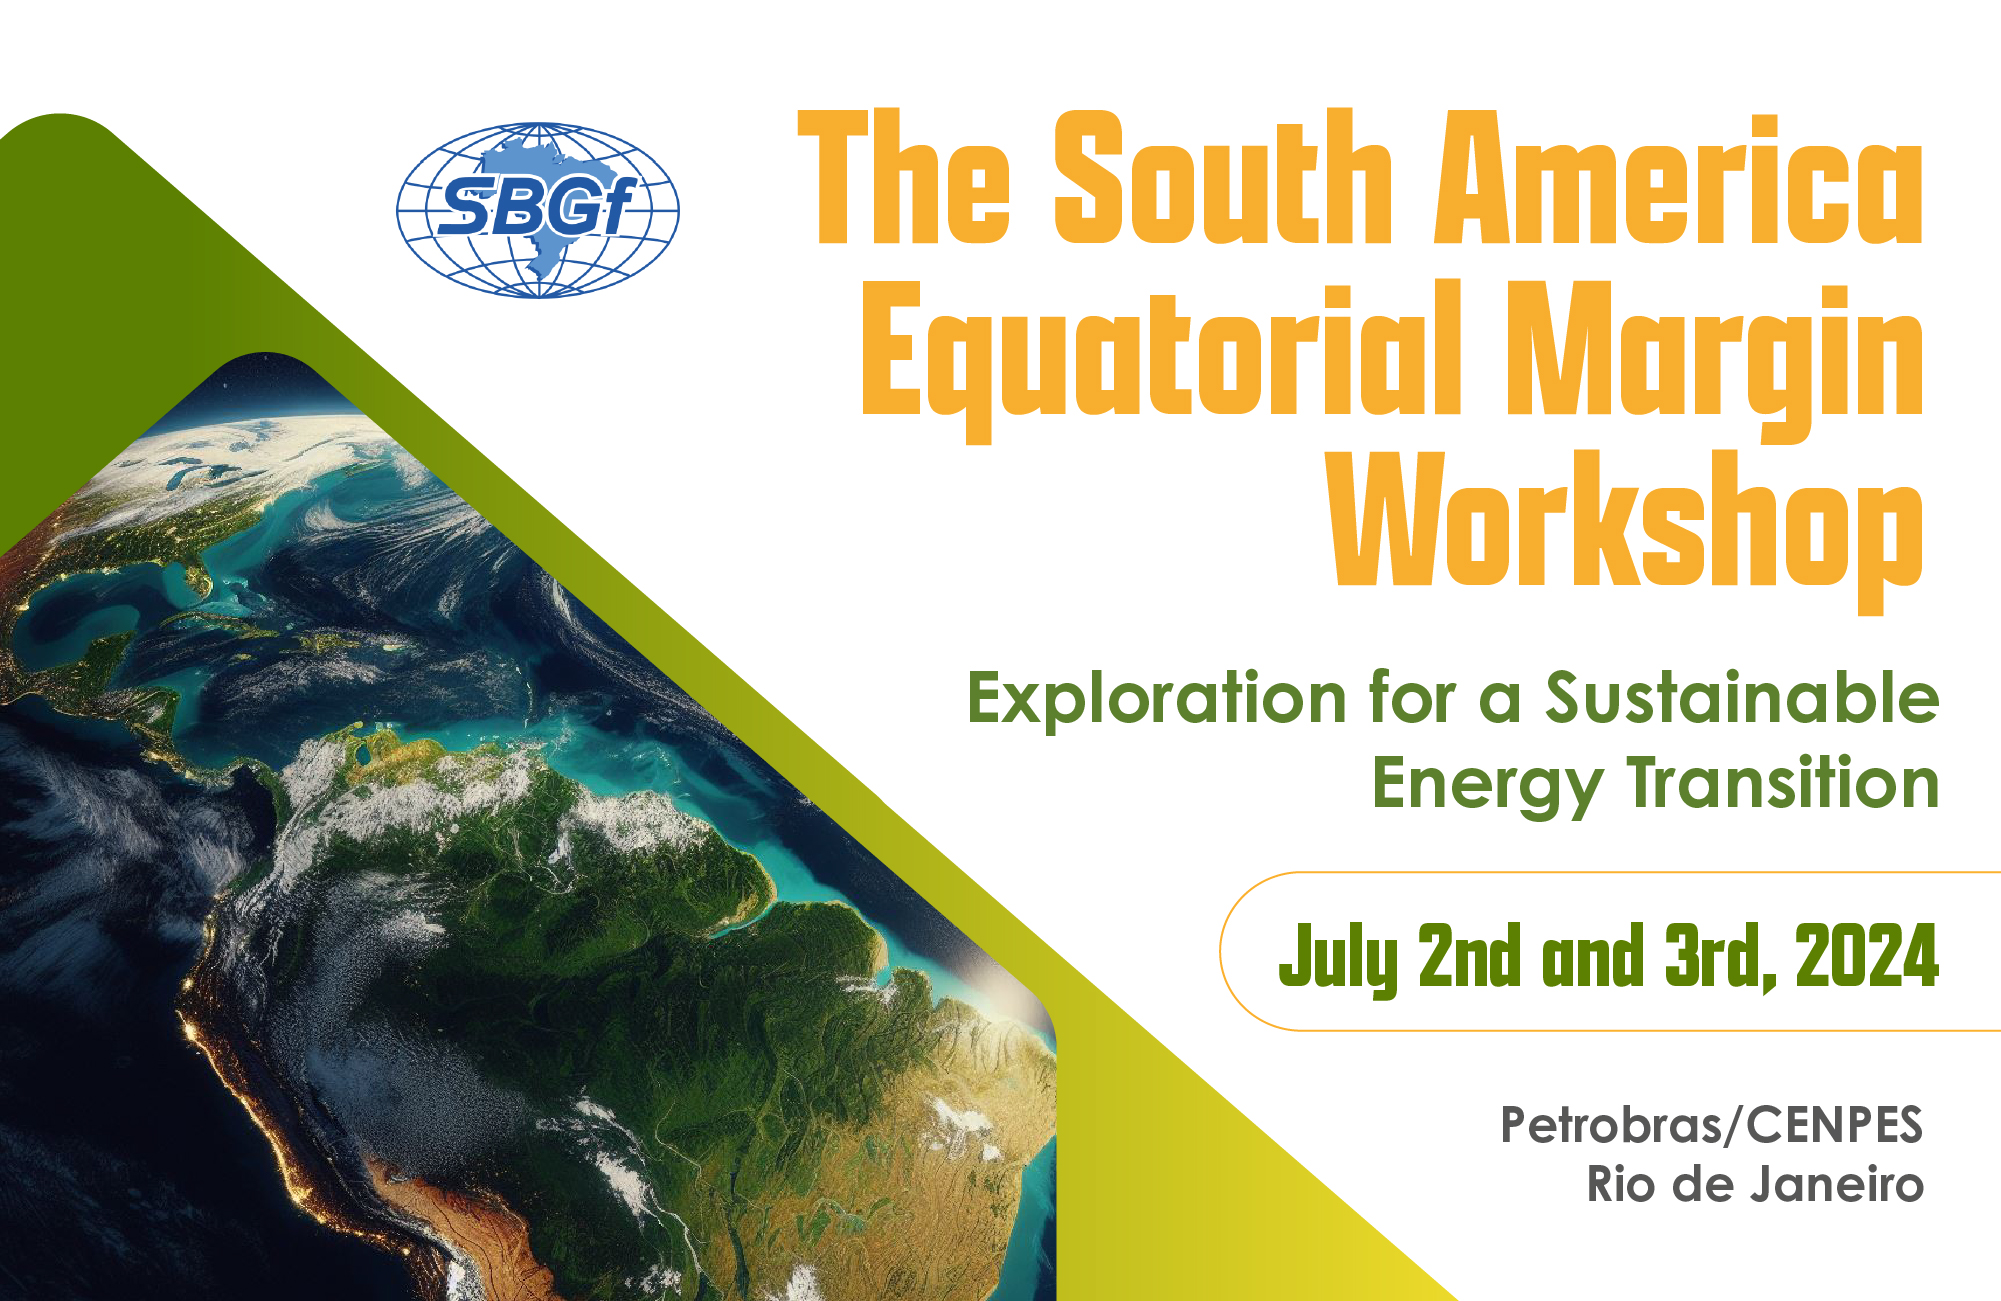 The South America Equatorial Margin Workshop - Exploration for a Sustainable Energy Transition